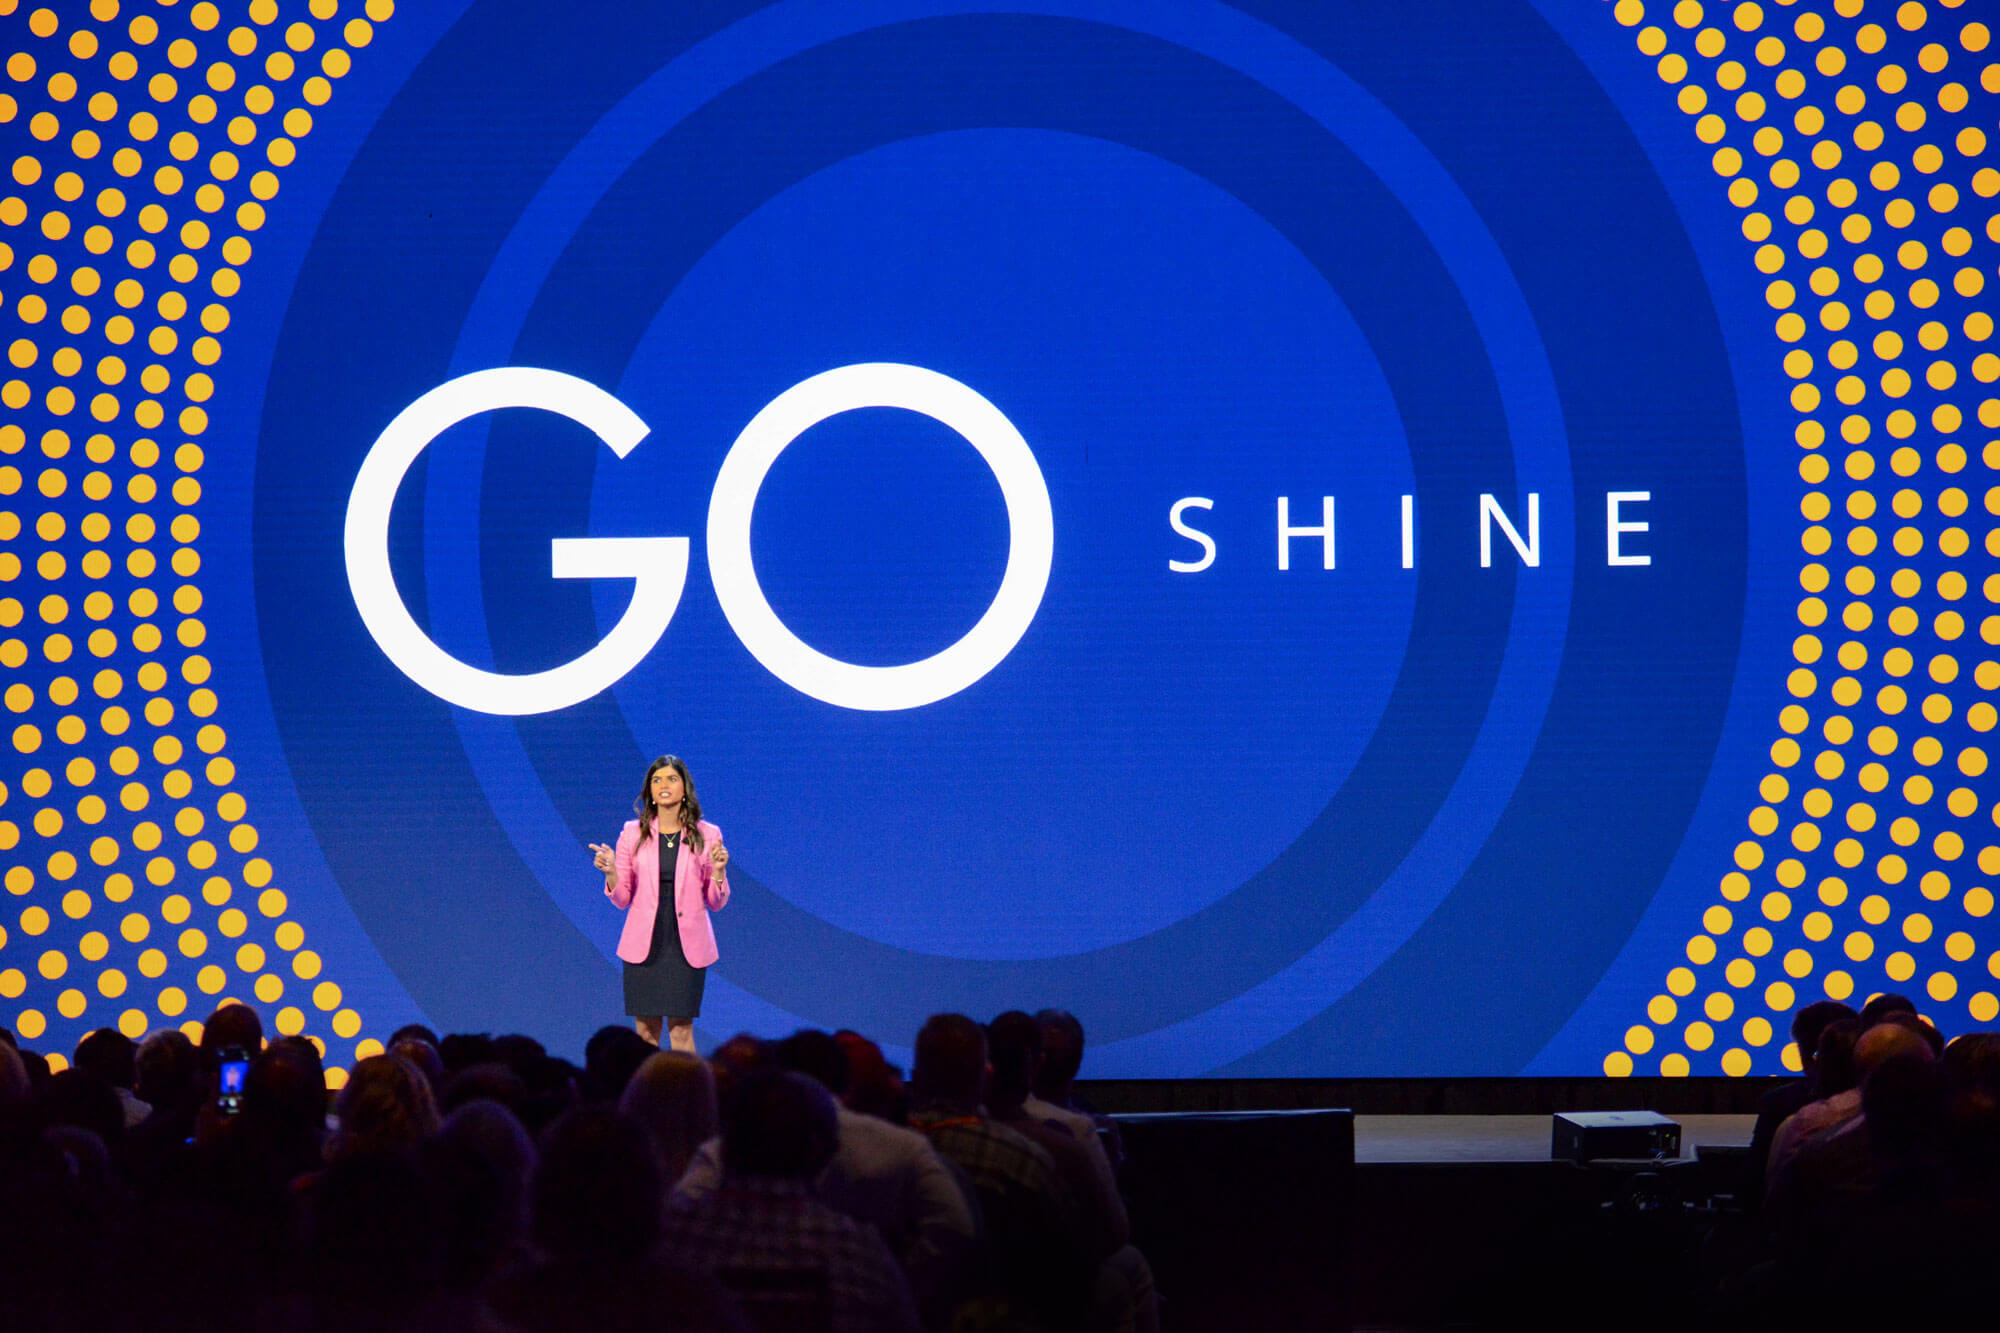 Woman presenting on stage with the words "Go Shine" on the screen behind her